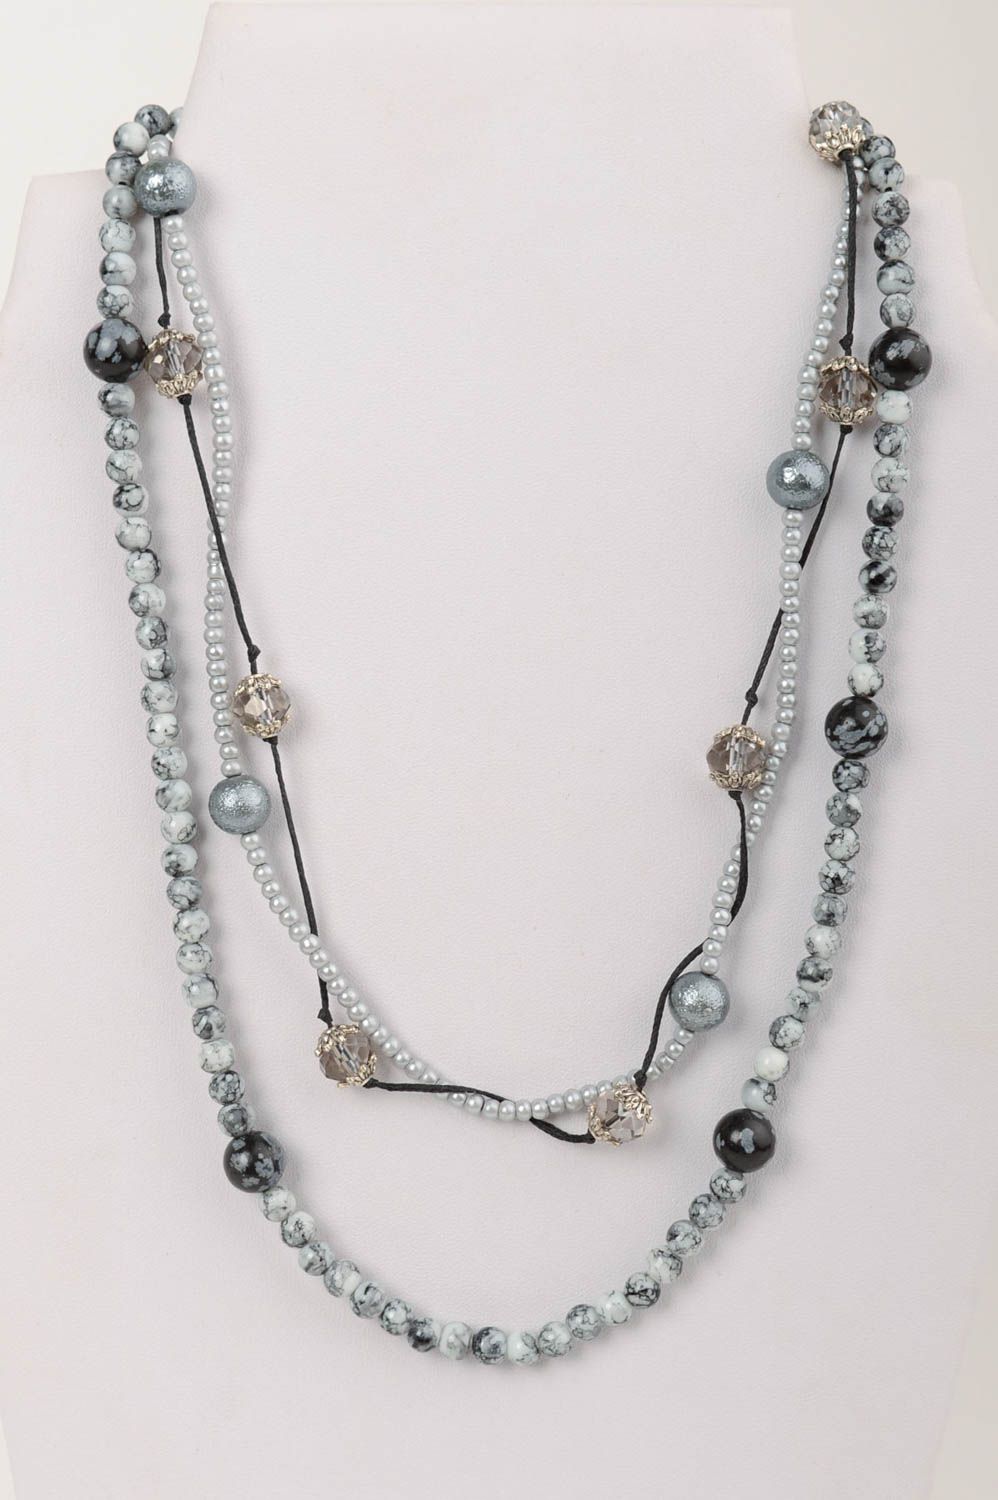 Czech crystal necklace with ceramic pearls on long cord handmade accessory photo 1